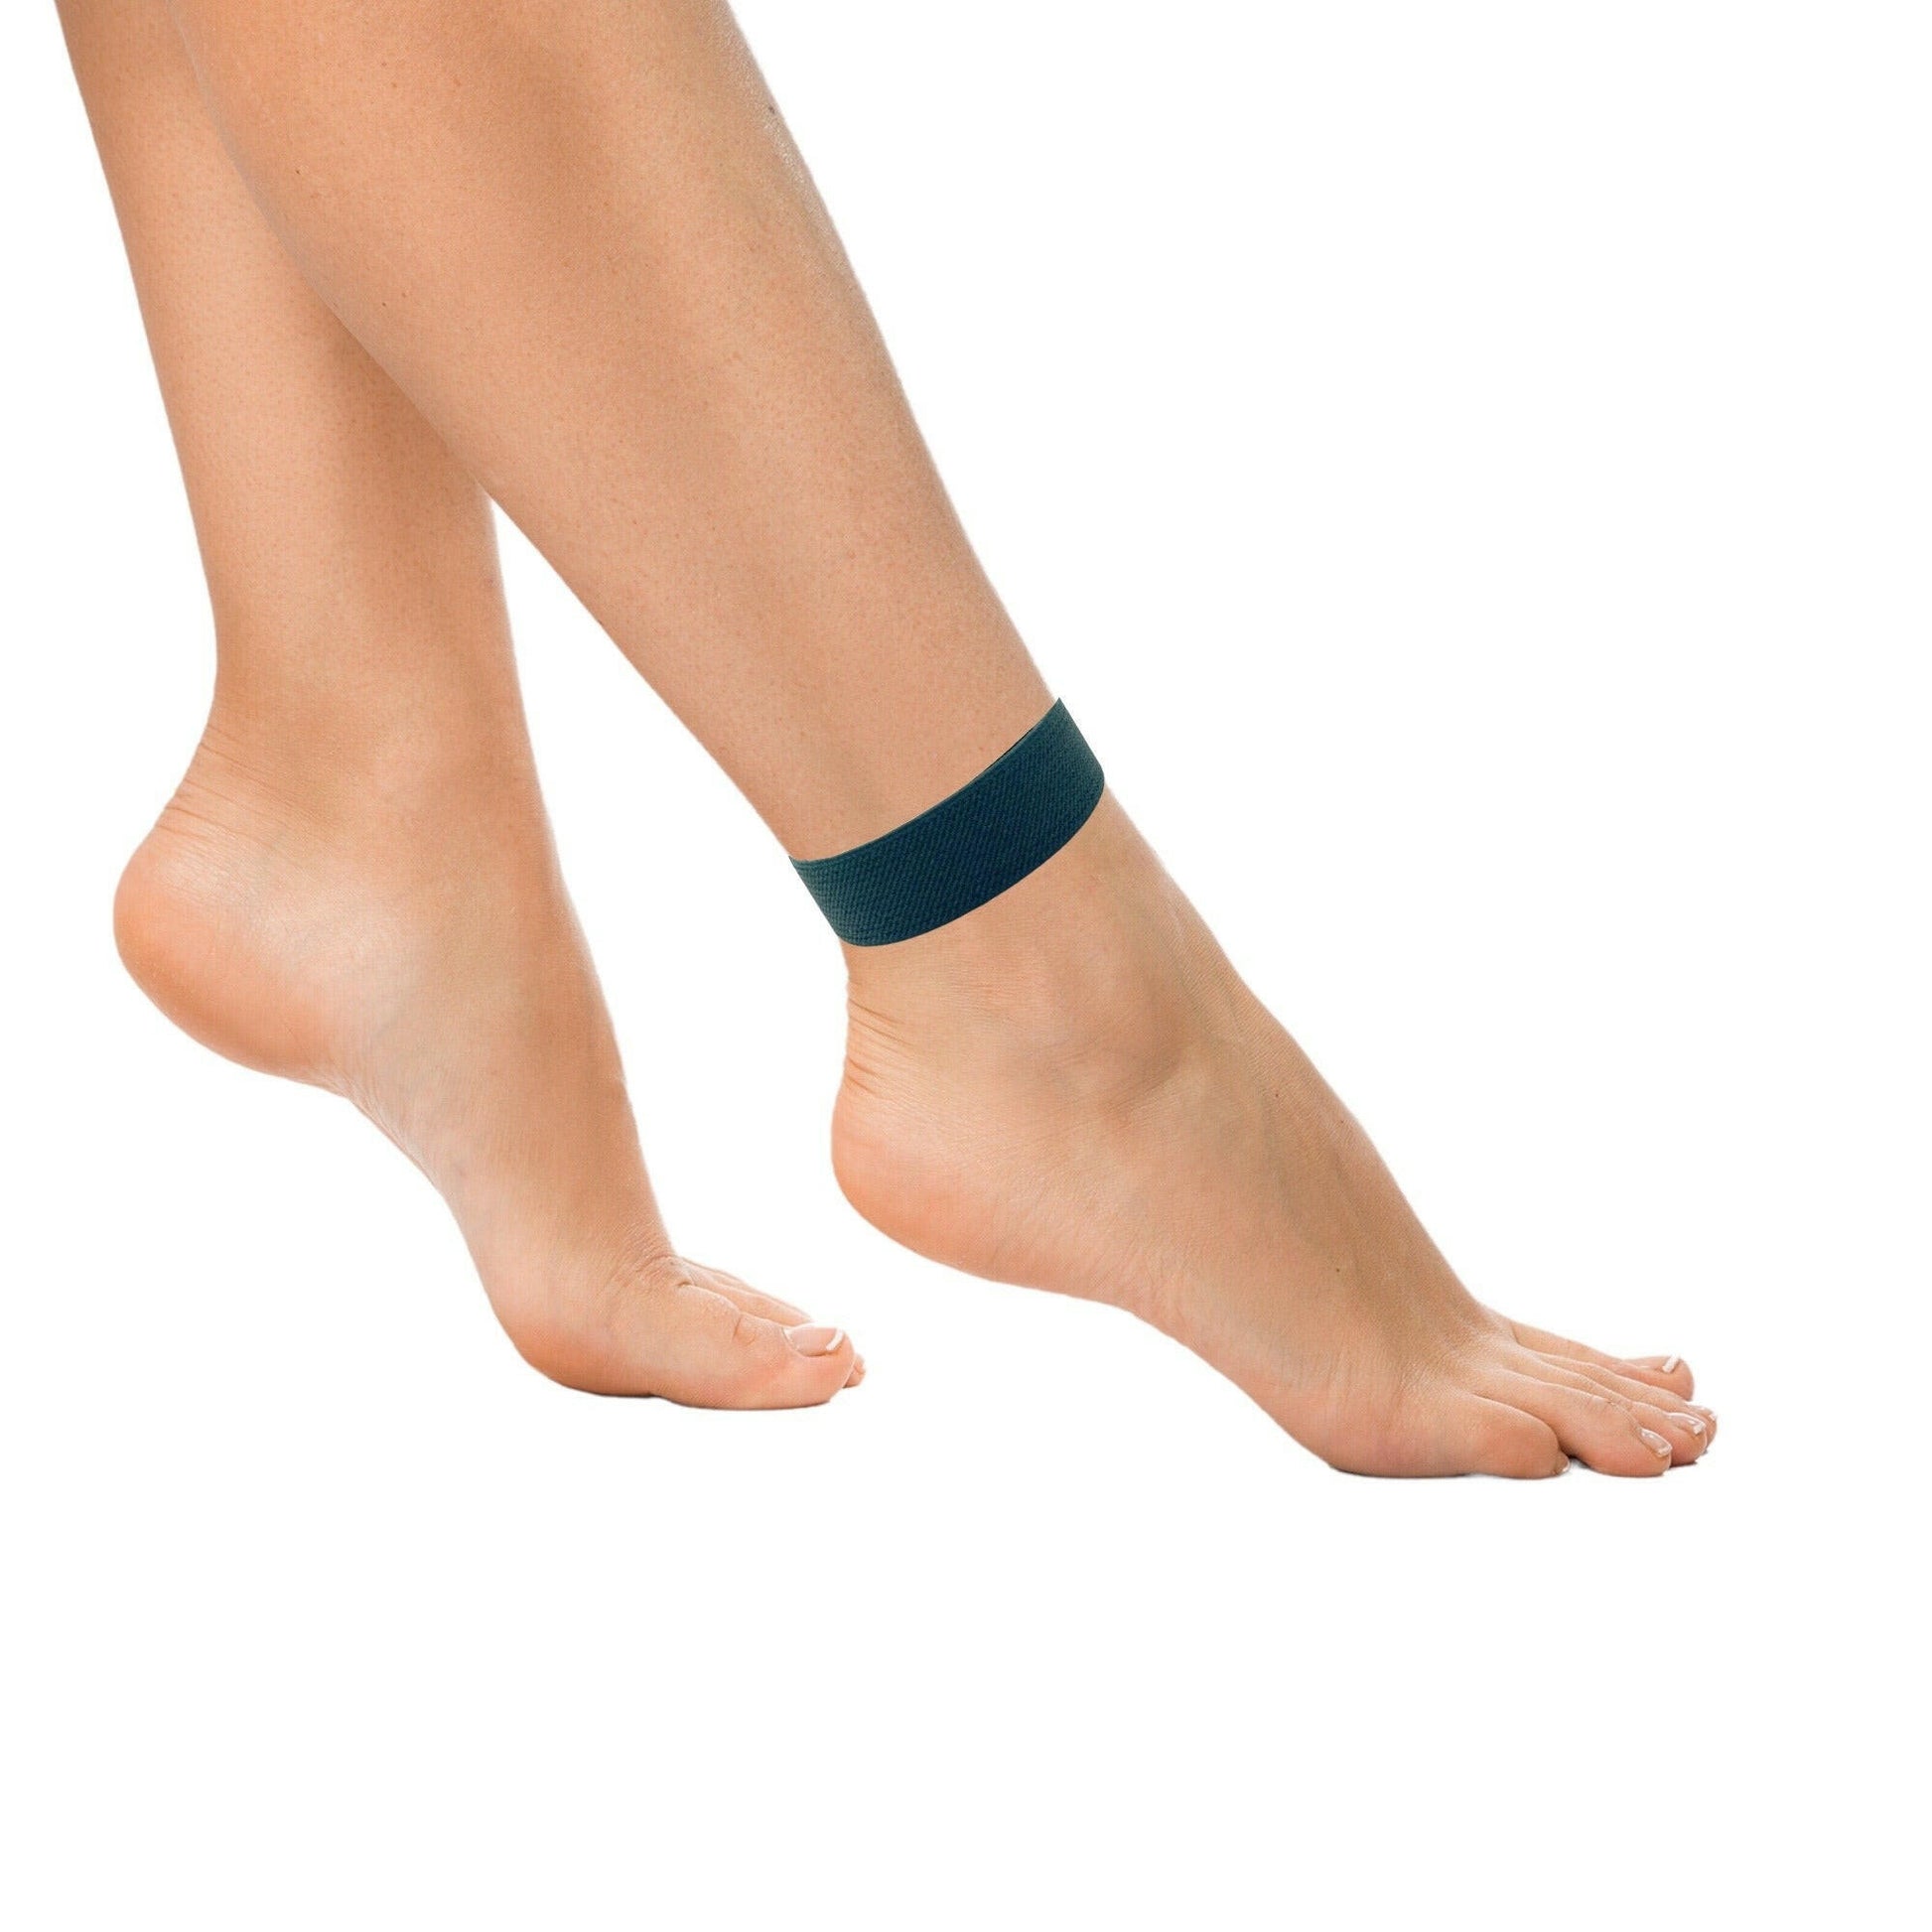 Anti Swelling Healing AcuAnklet-Slip On Acupressure Band-Pain Relief-Balance-Anxiety-Menopausal Symptoms - Acupressure Bracelets